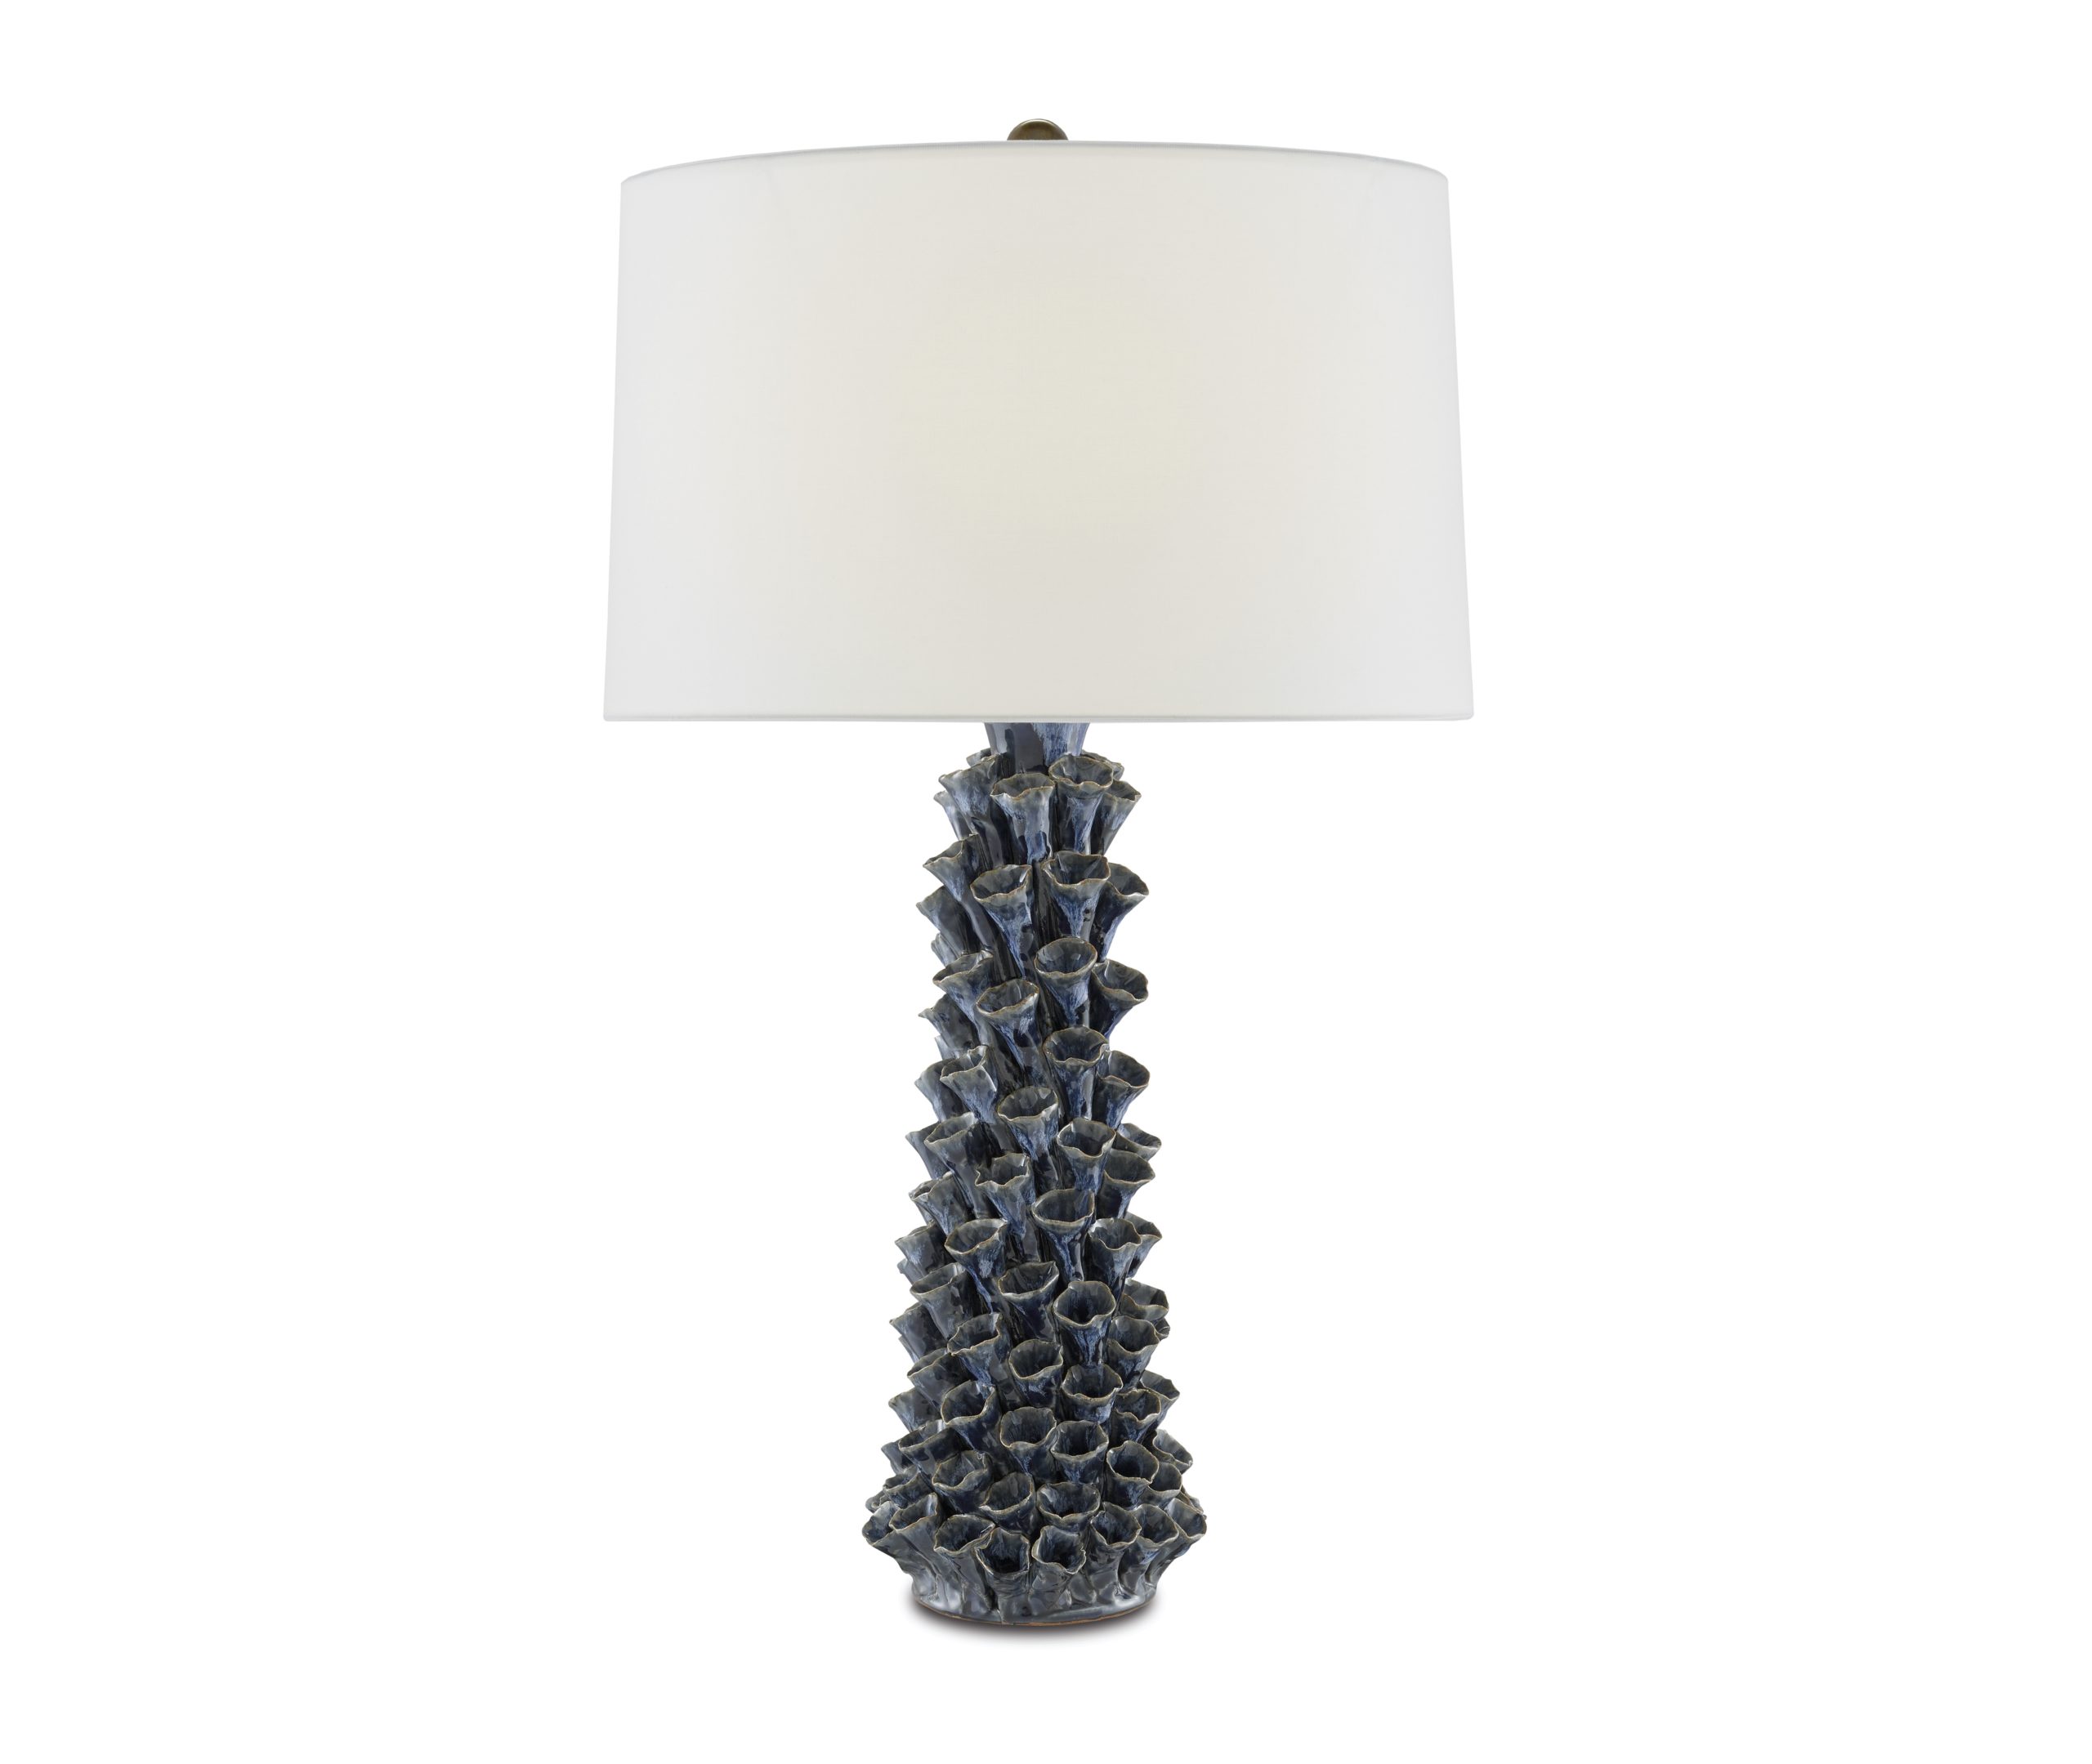 NYDC_WNWN_currey_and_co_products_sunken_blue_table_lamp_6000